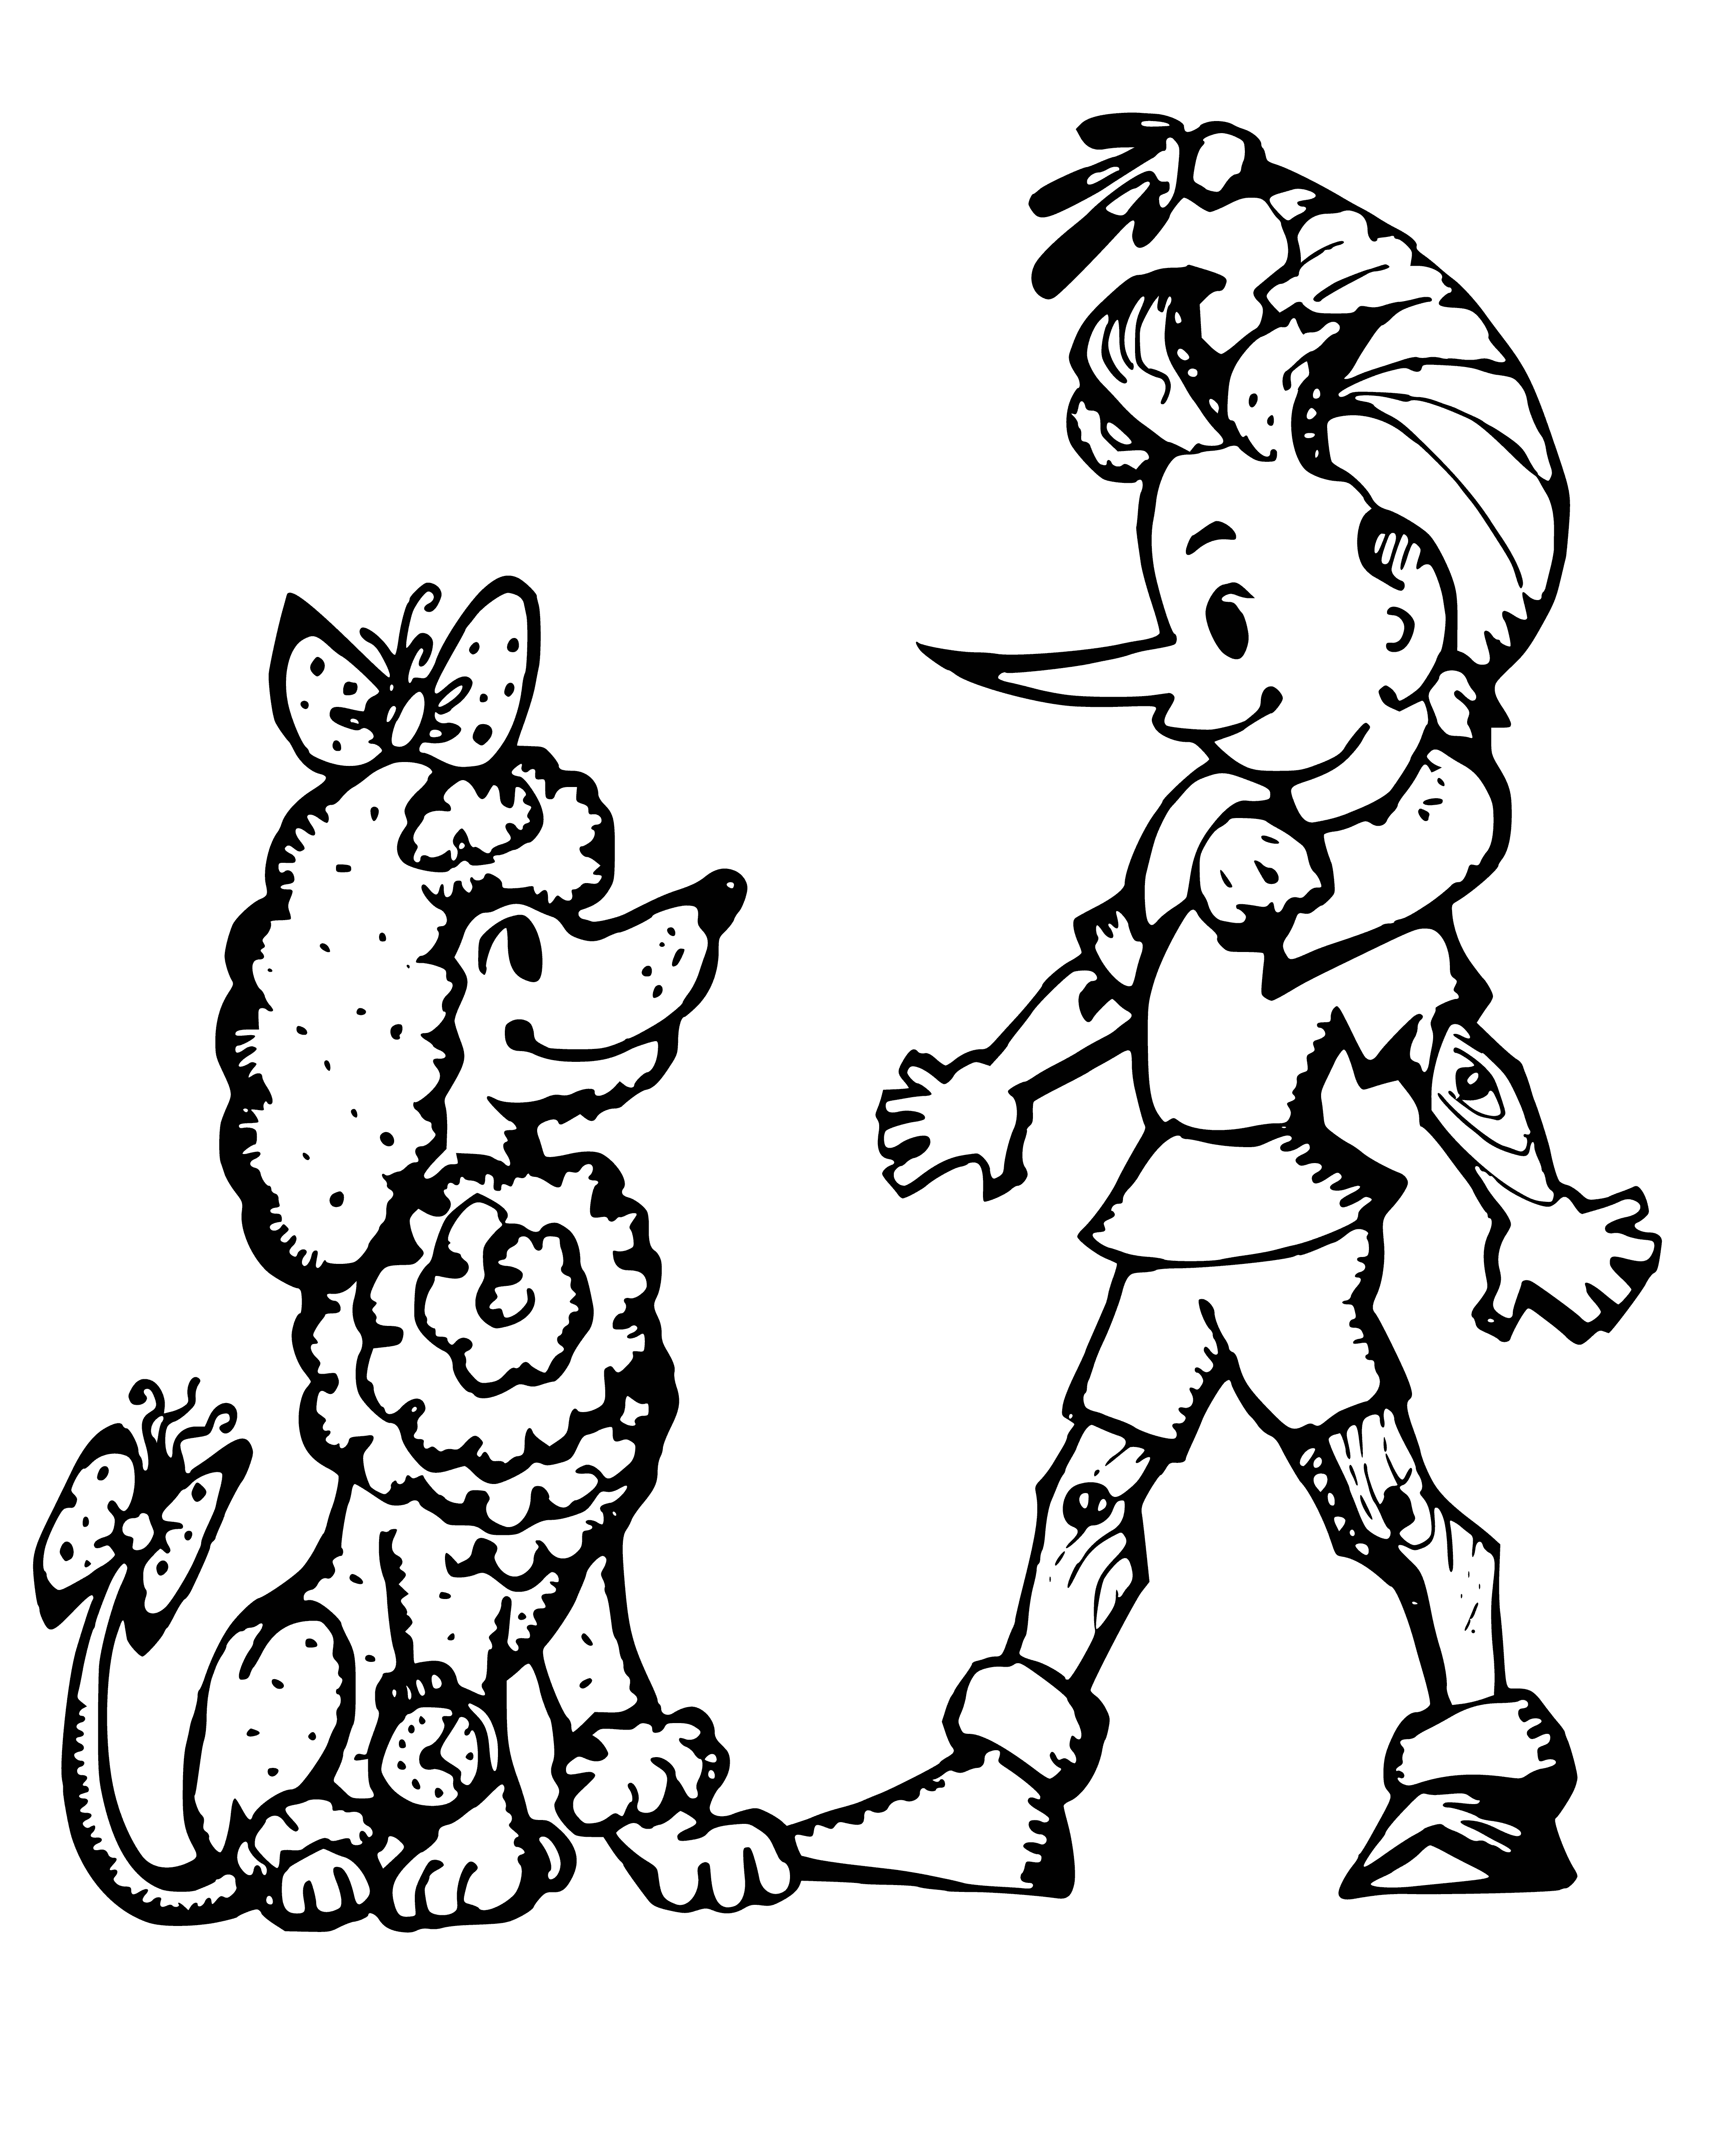 Poodle Artemon and Buratino coloring page